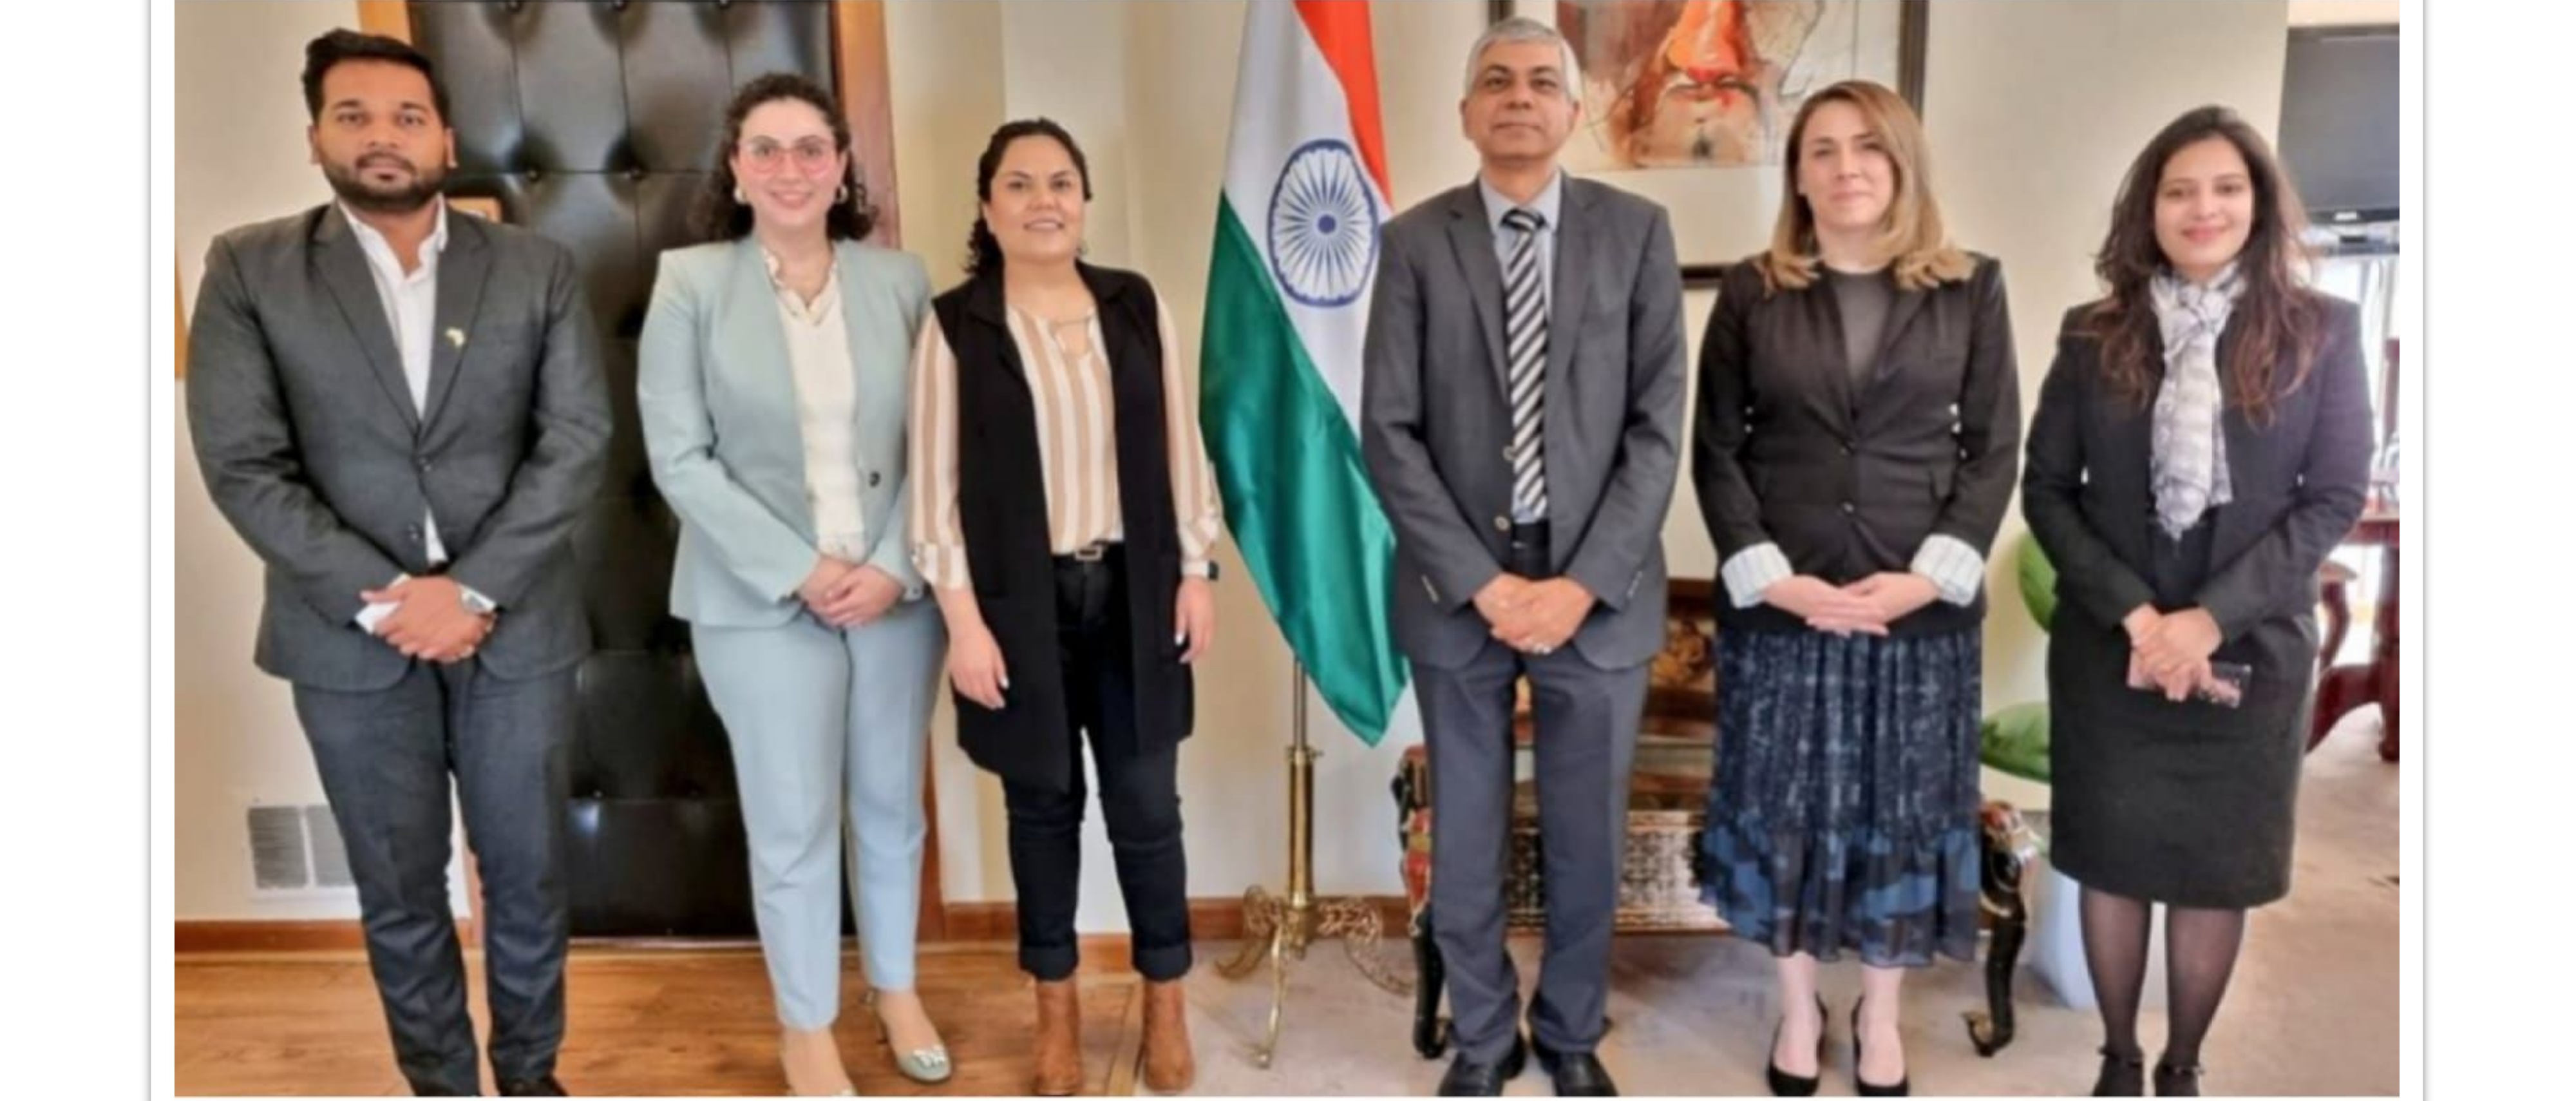  <div style="fcolor: #fff; font-weight: 600; font-size: 1.5em;">
<p style="font-size: 13.8px;">Ambassador Pankaj Sharma and Embassy officers held a meeting with senior executives of IBM Mexico. 

Discussed the amazing success of Indians in the technology world and the possibility of enhancing the hiring of this talent from India.

<br /><span style="text-align: center;">14 November 2022</span></p>
</div>